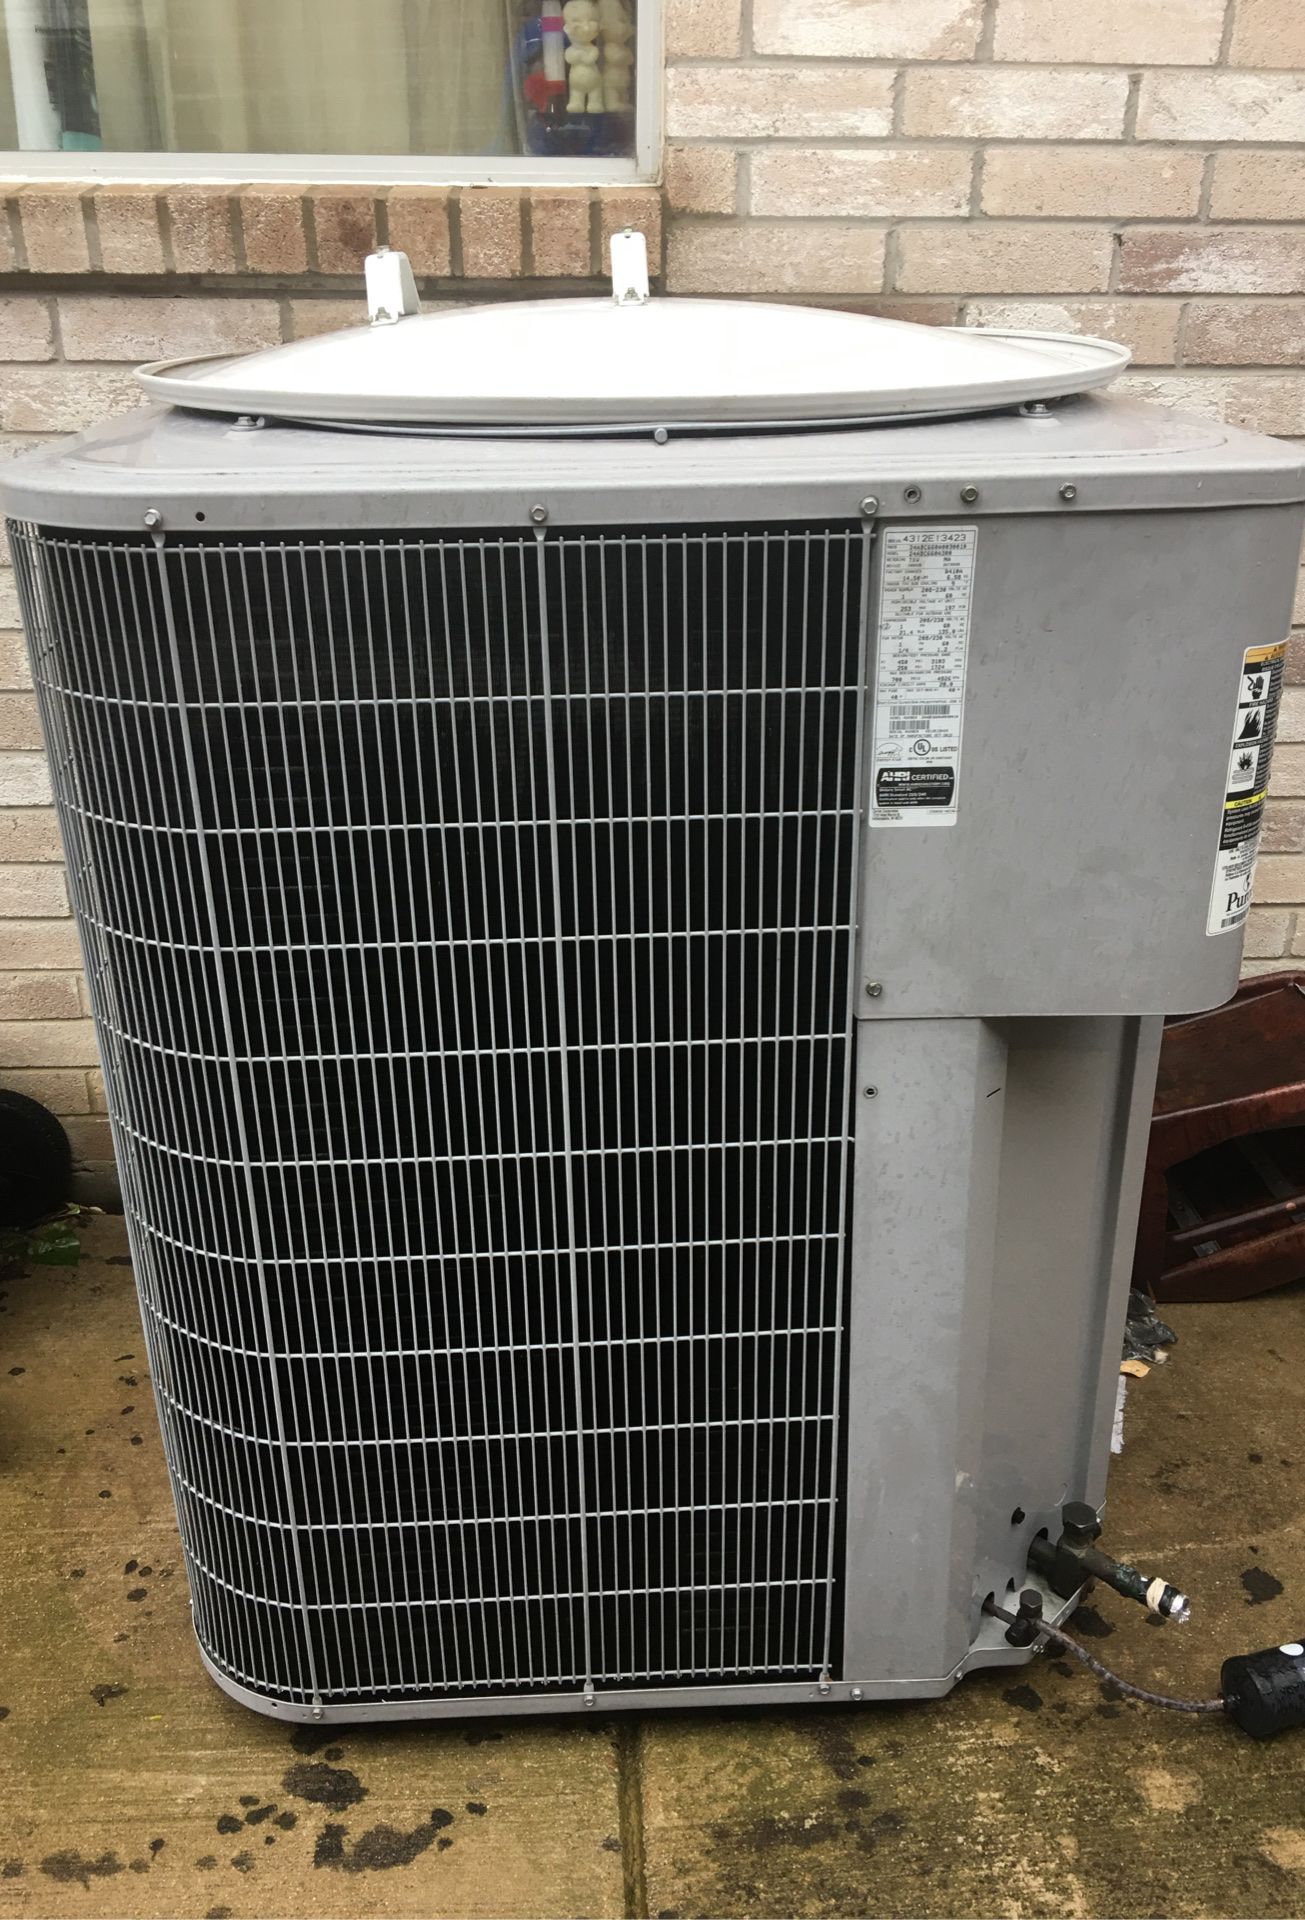 5 tons AC unit (CARRIER) used normal tear and wear